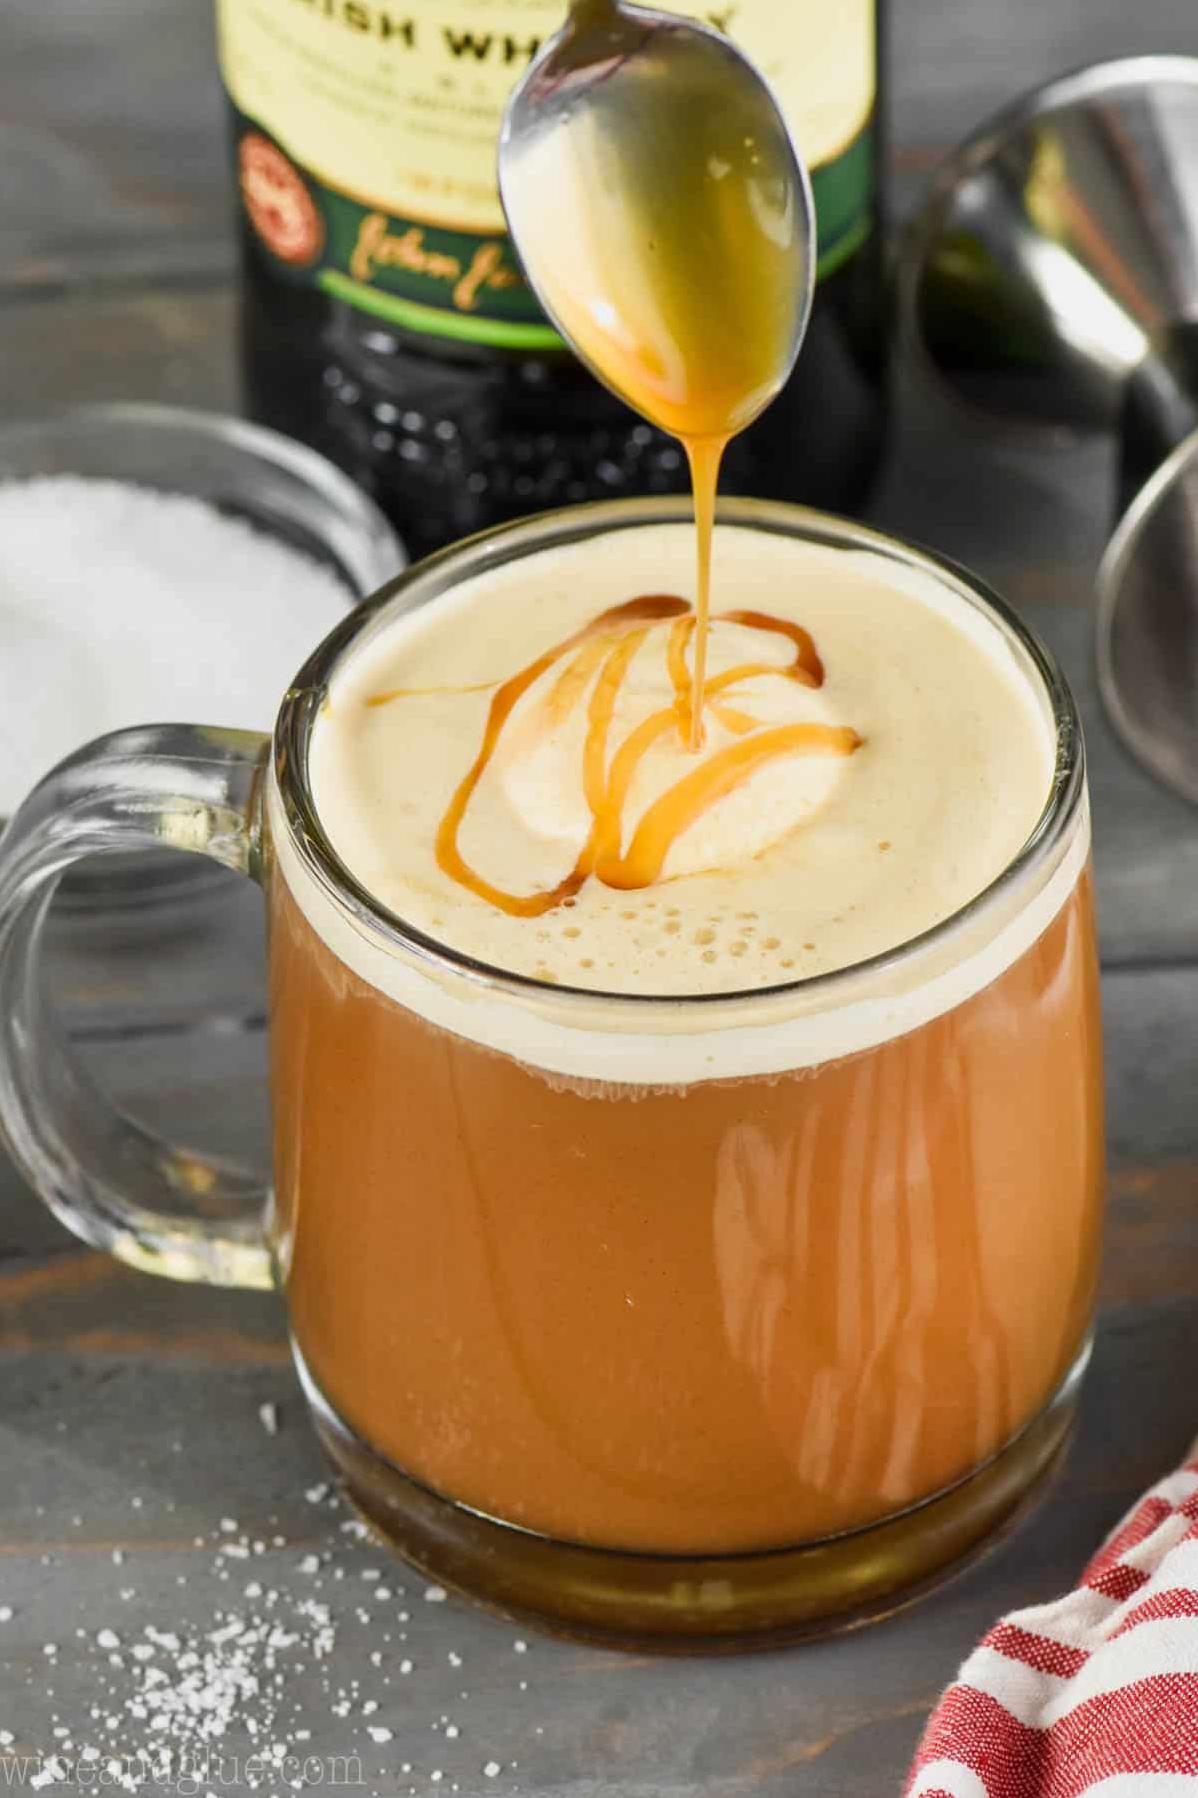  Get ready to savor the sweet and creamy flavor with every sip of this Caramel Irish Cream Coffee.